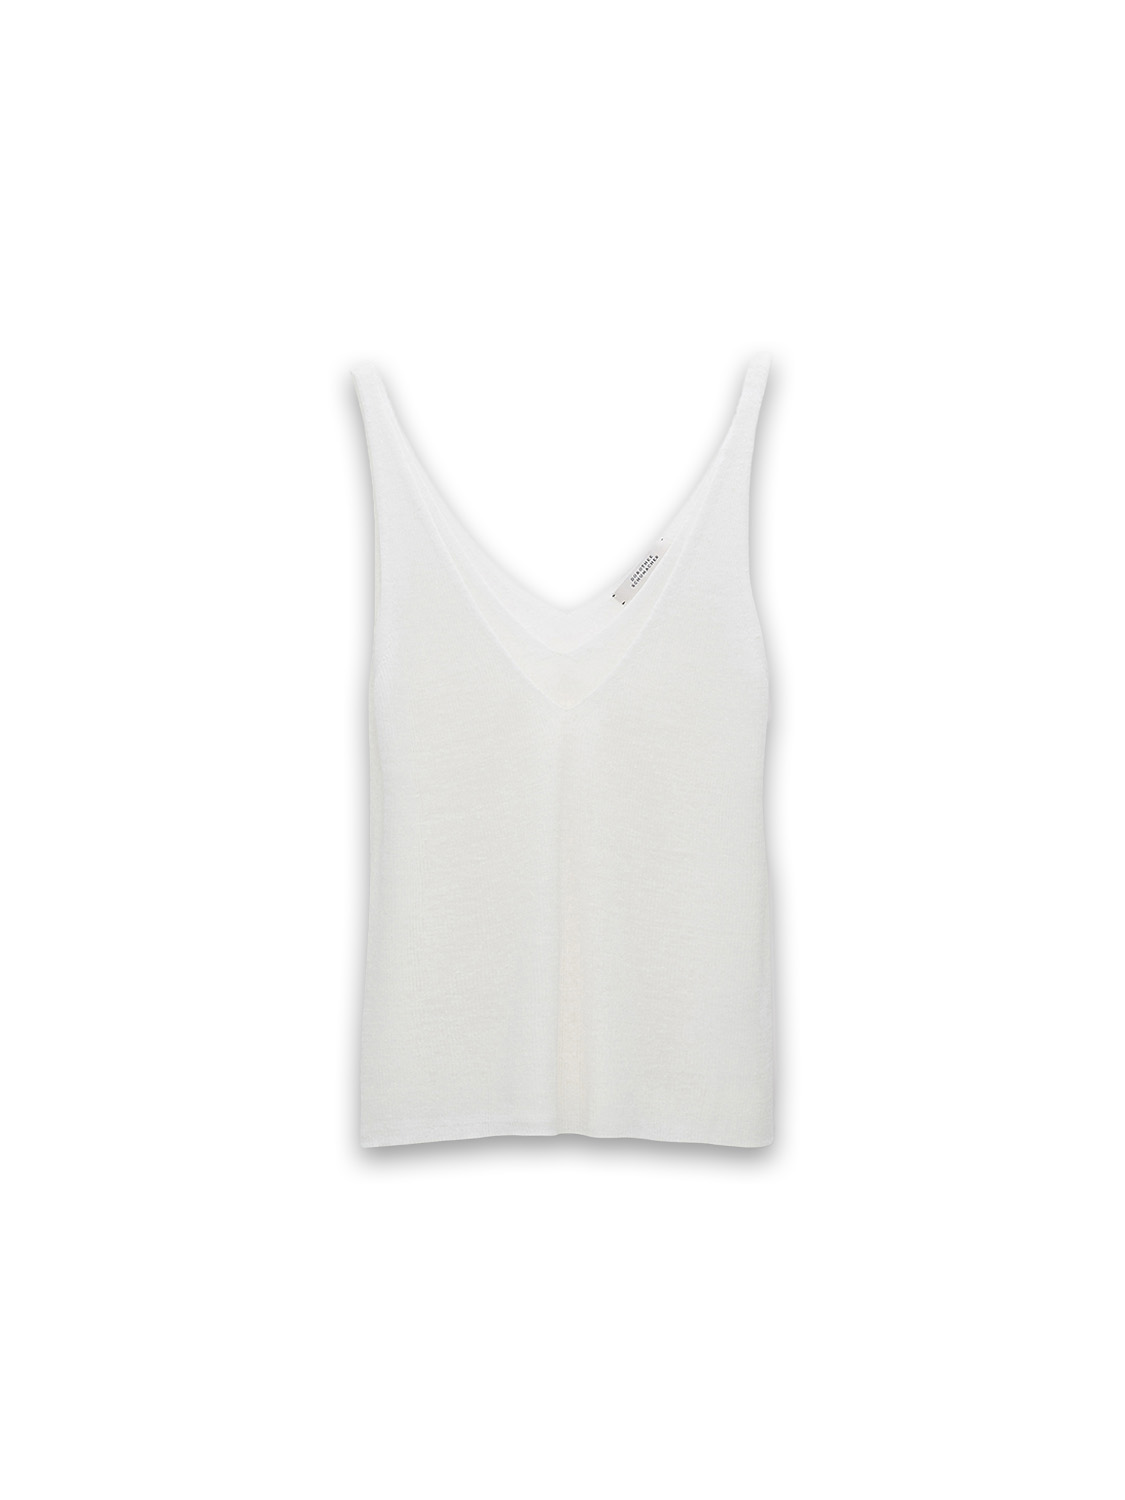 Dorothee Schumacher Summer Ease rib knit top  white S